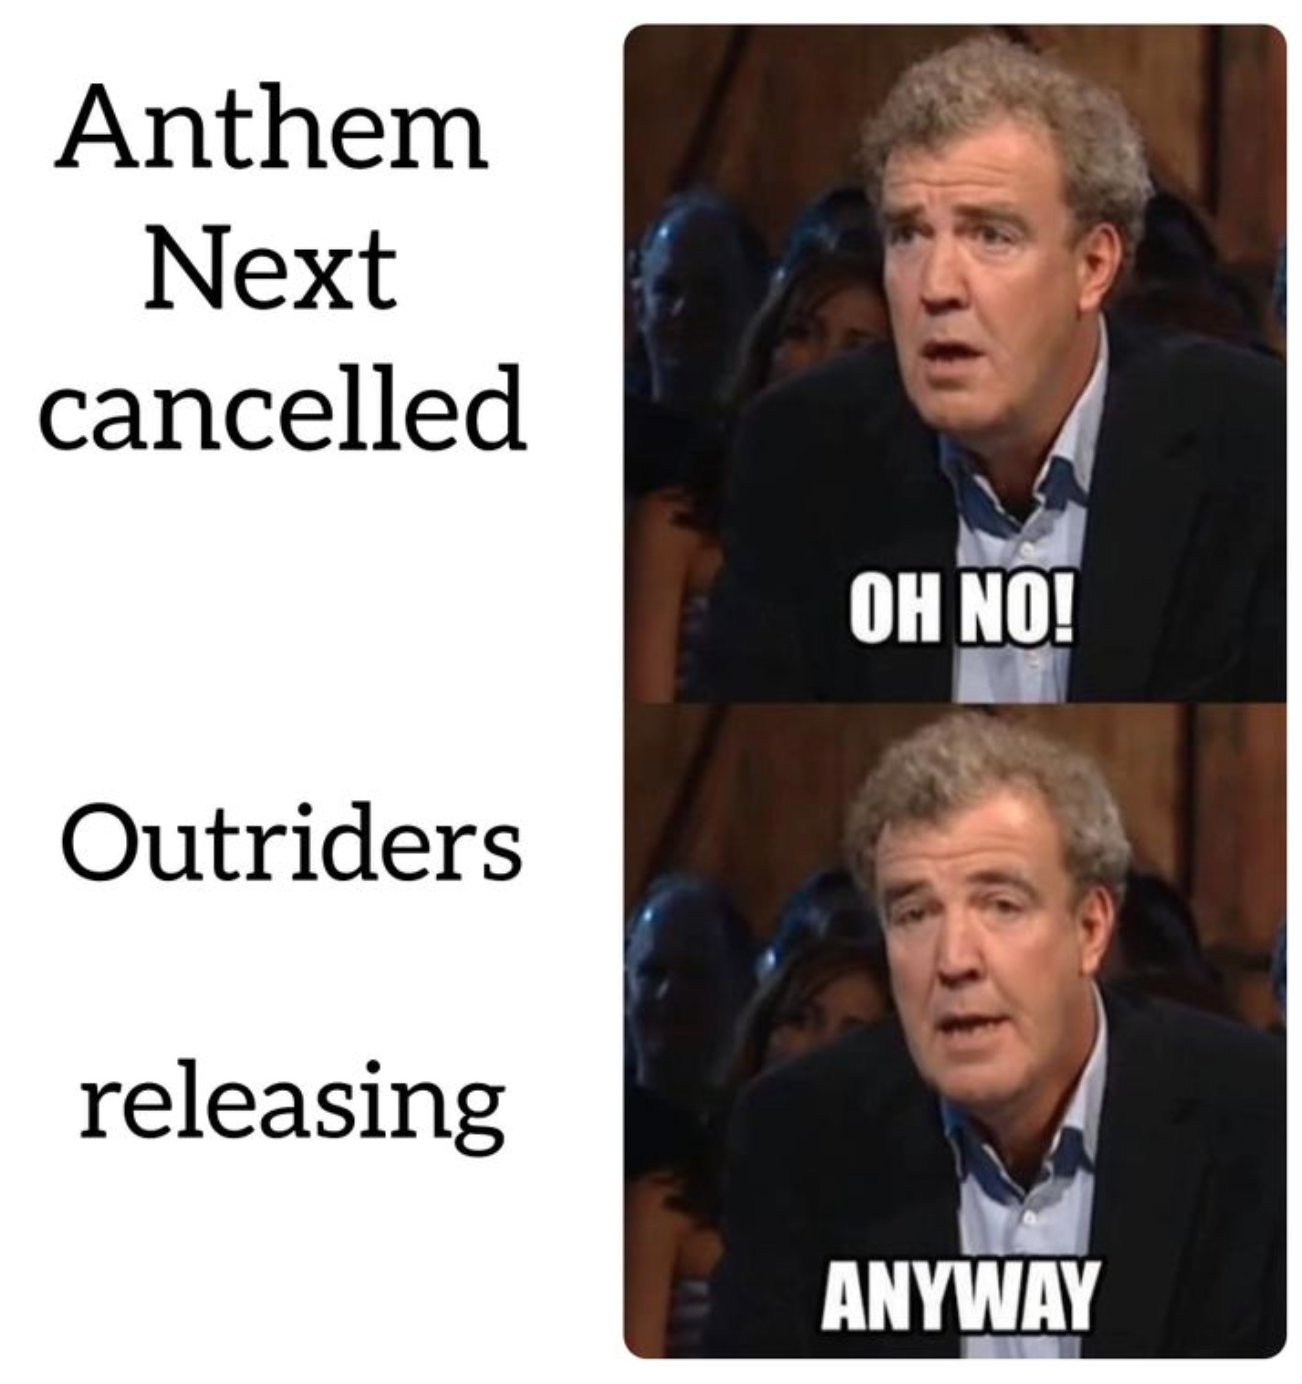 Outriders Memes - oh no anyway top gear template - Anthem Next cancelled Oh No! Outriders releasing Anyway